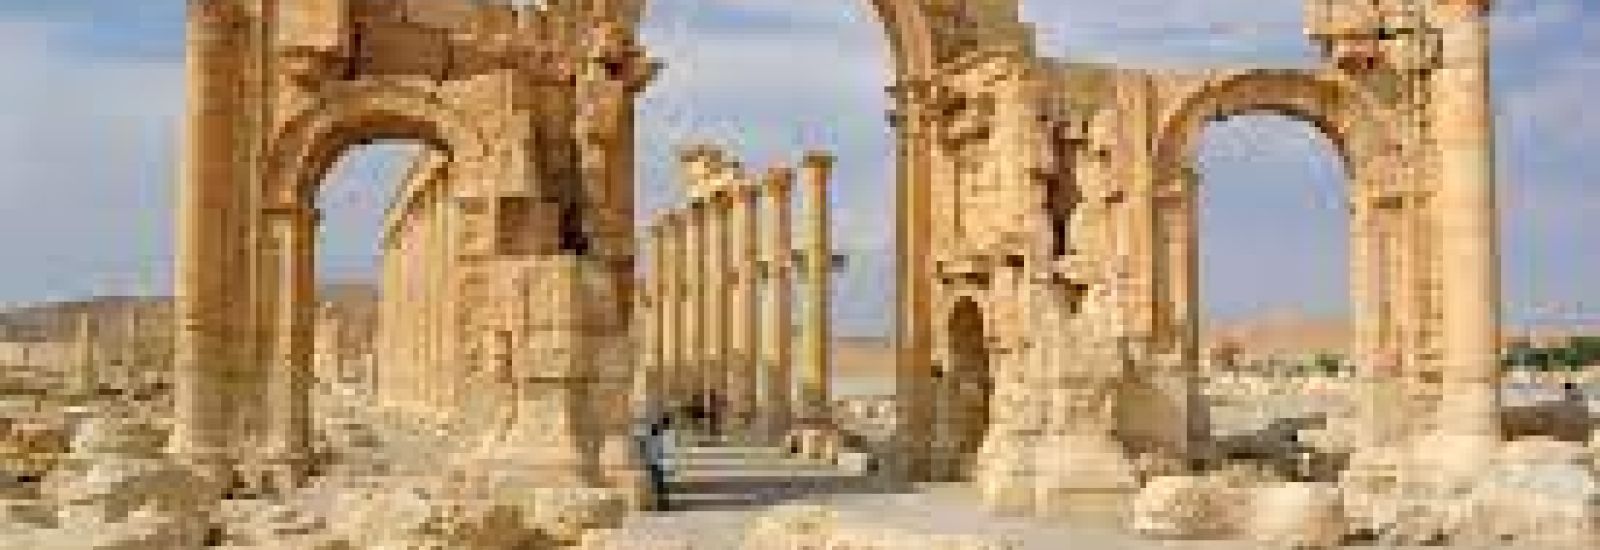 The arched ruins of ancient Palmyra, in the Syrian desert.